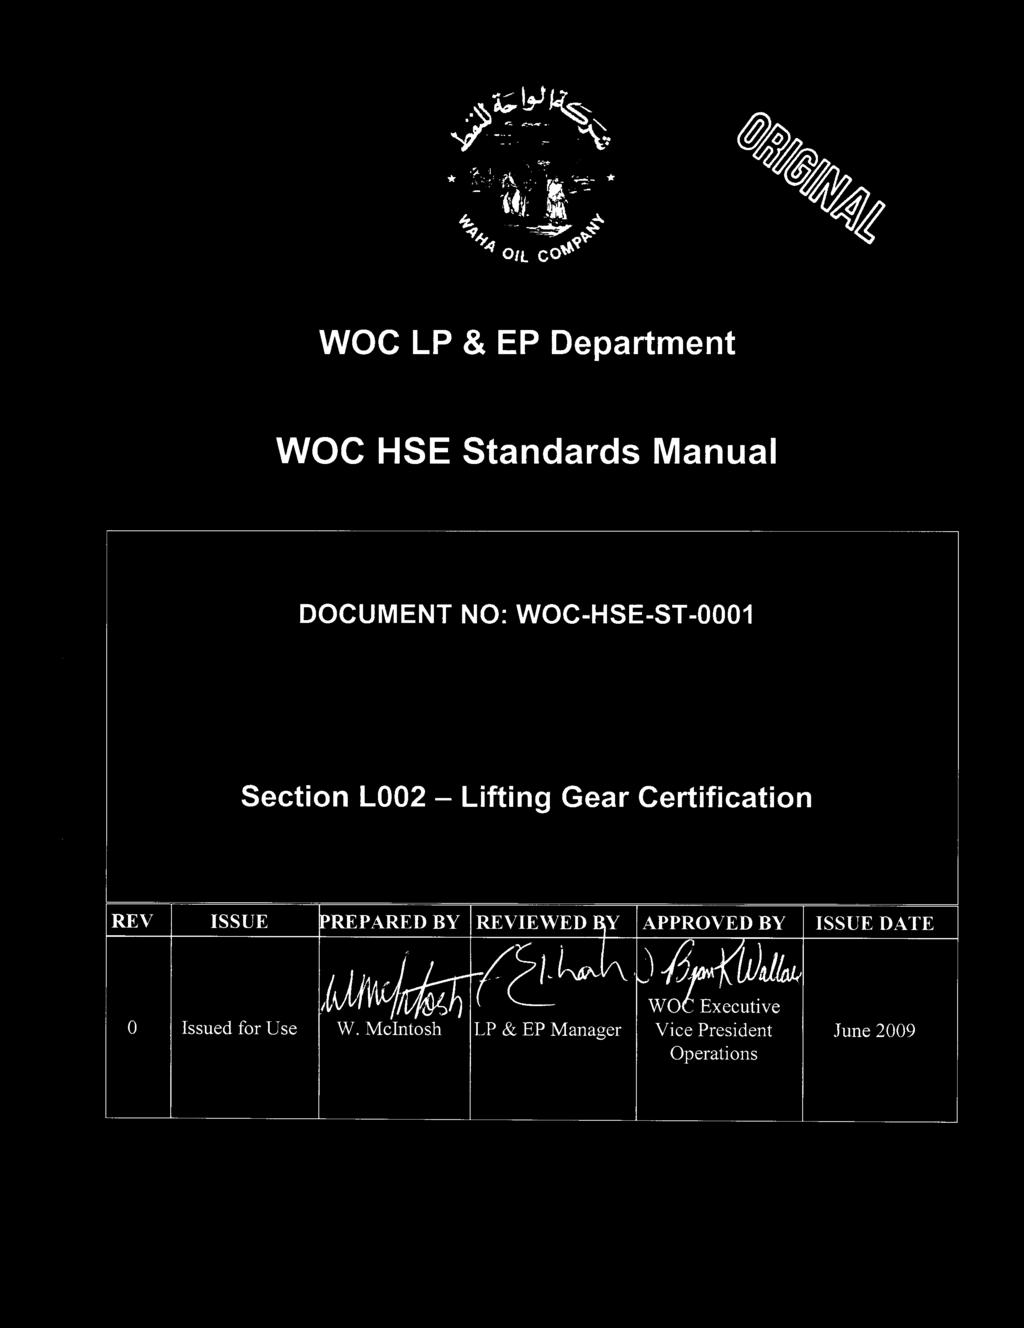 Section L002 - Lifting Gear Certification REV ISSUE PREPARED BY REVIEWED Y